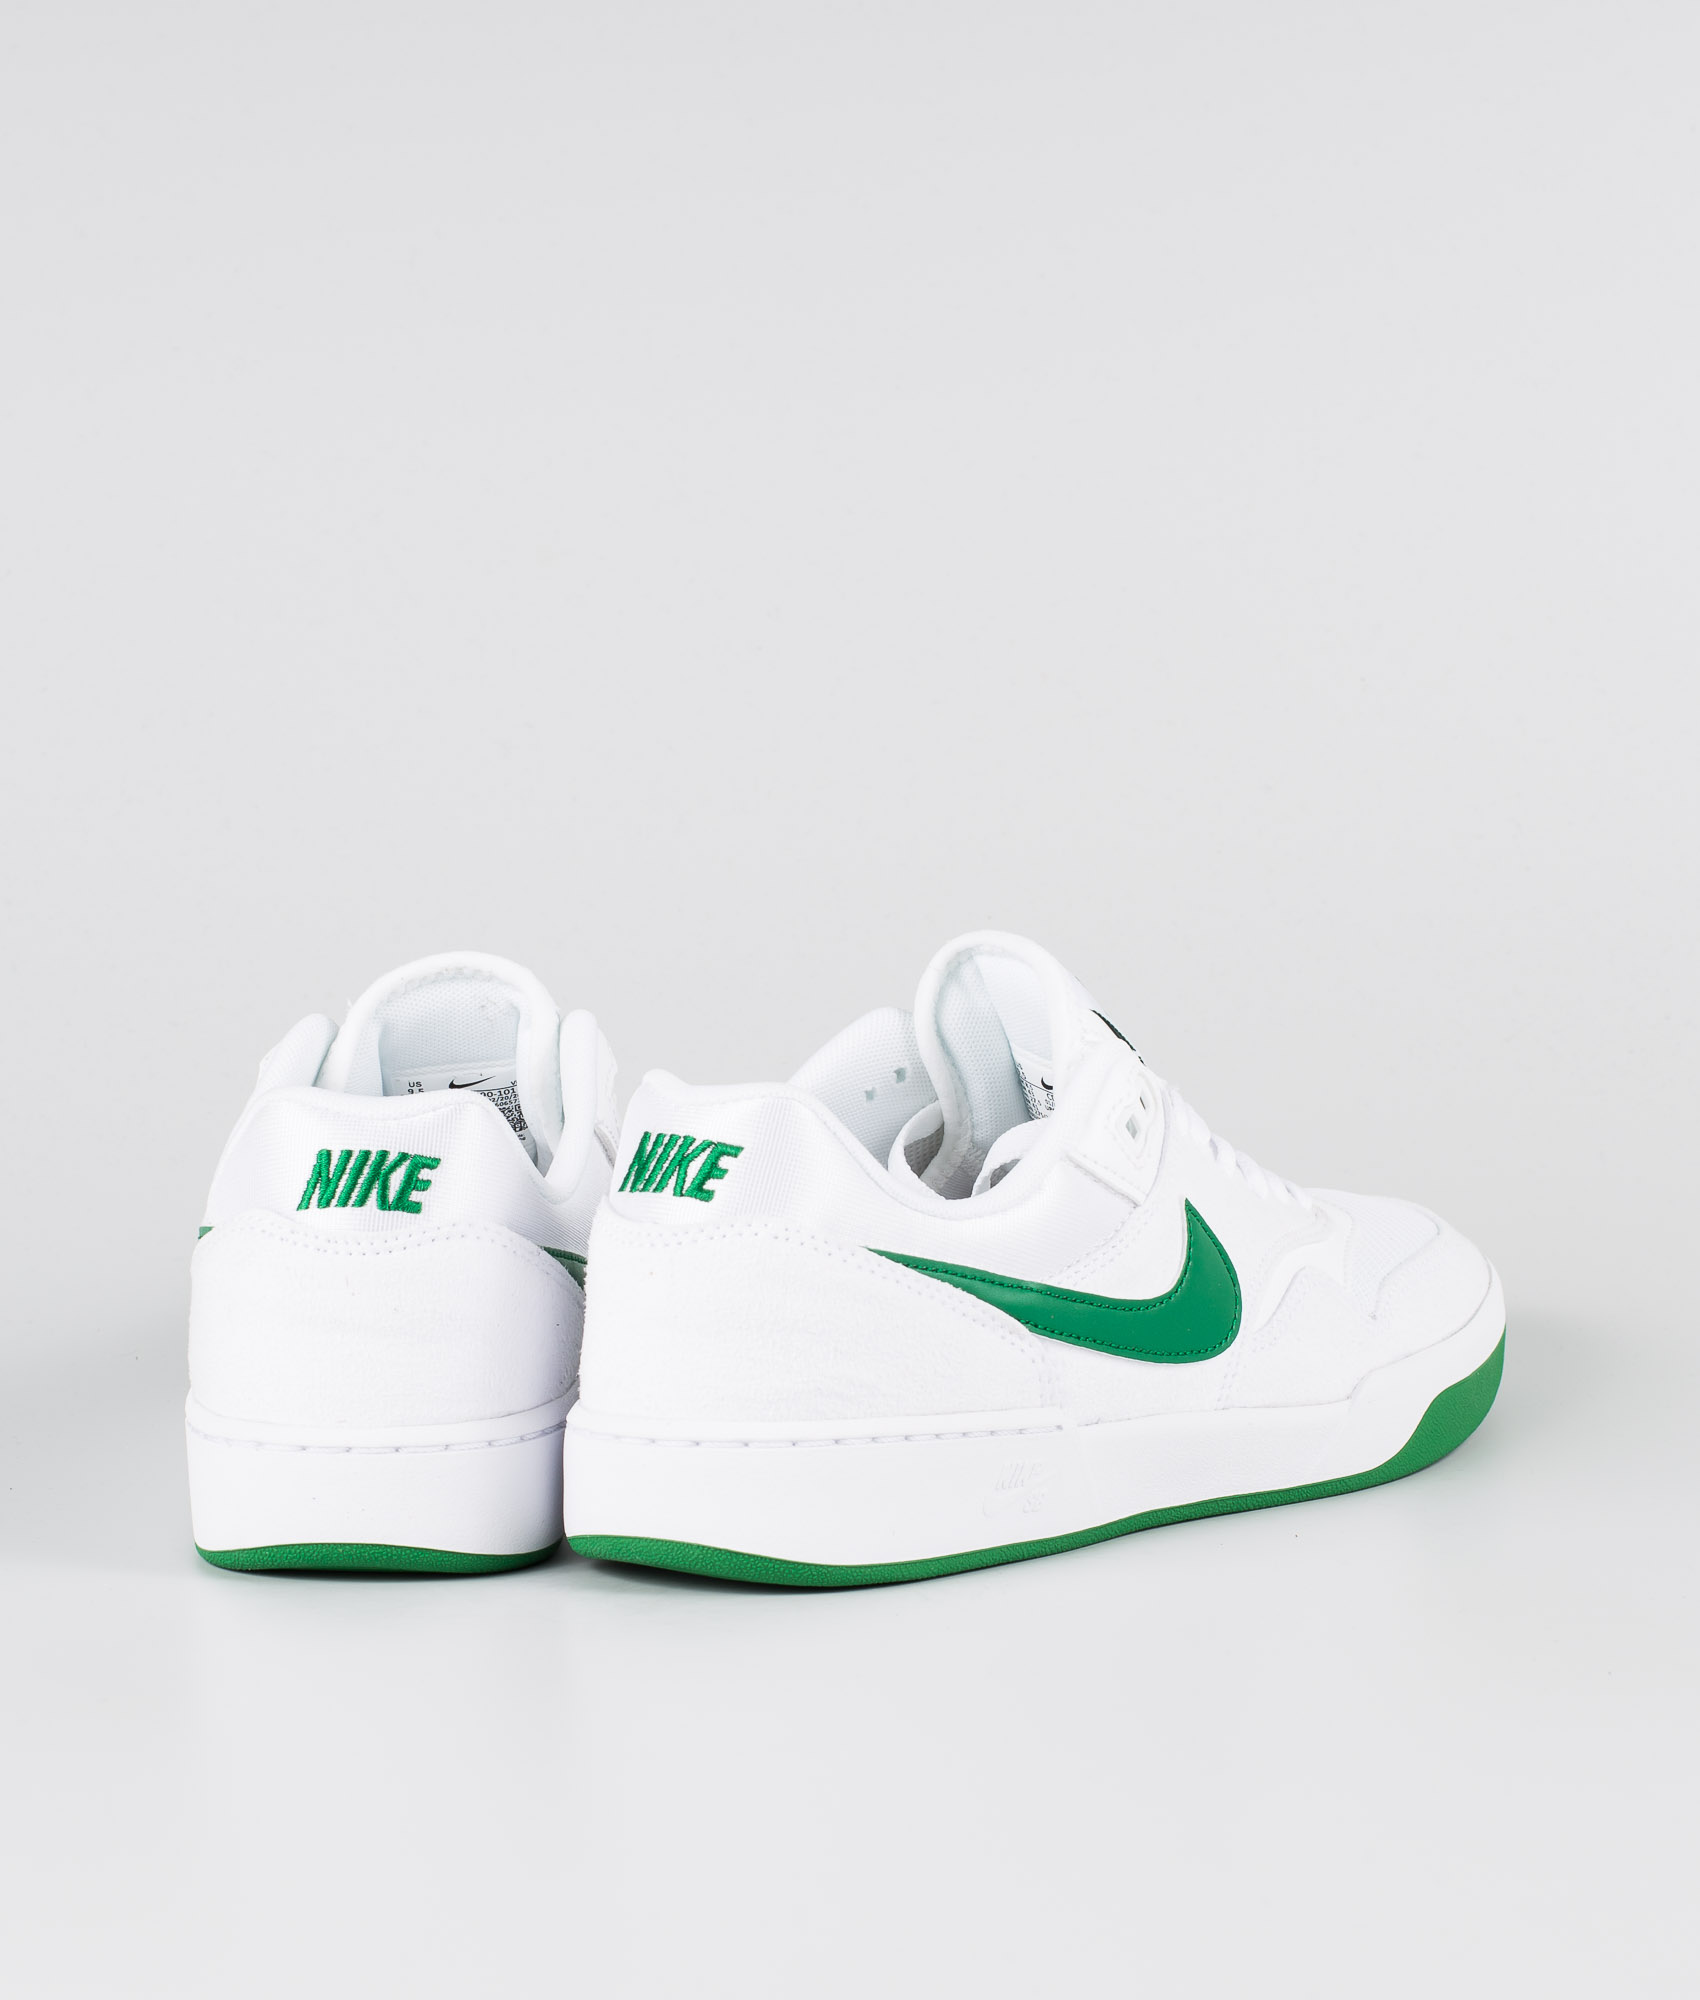 nike shoes green and white